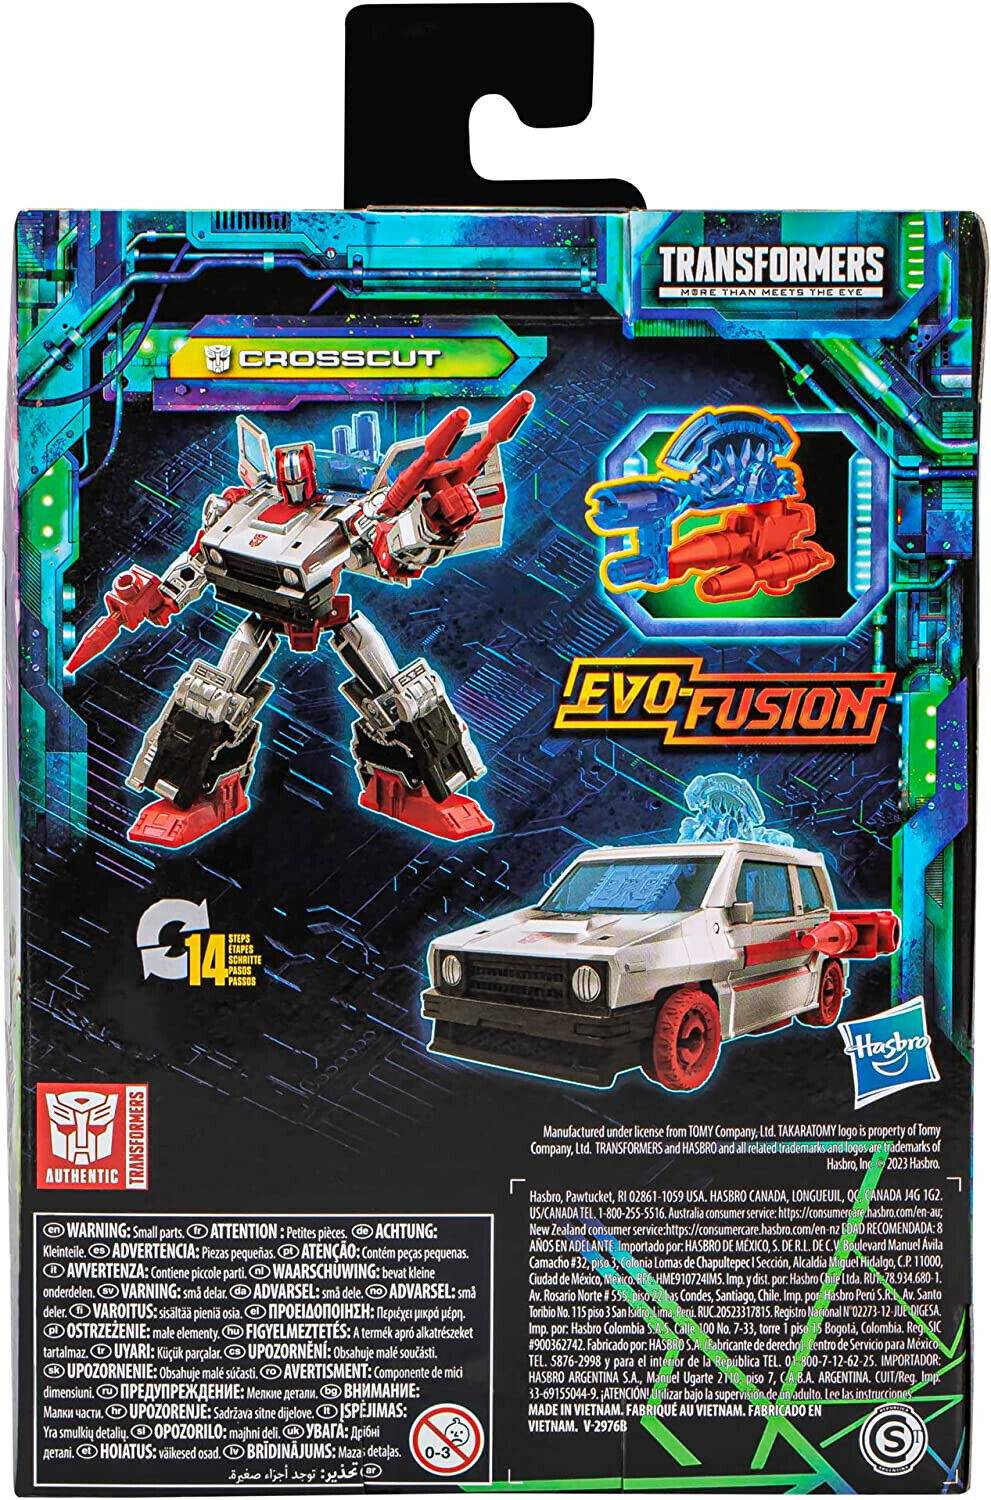 Transformers Generations Legacy Evolution Deluxe Crosscu Toy NEW